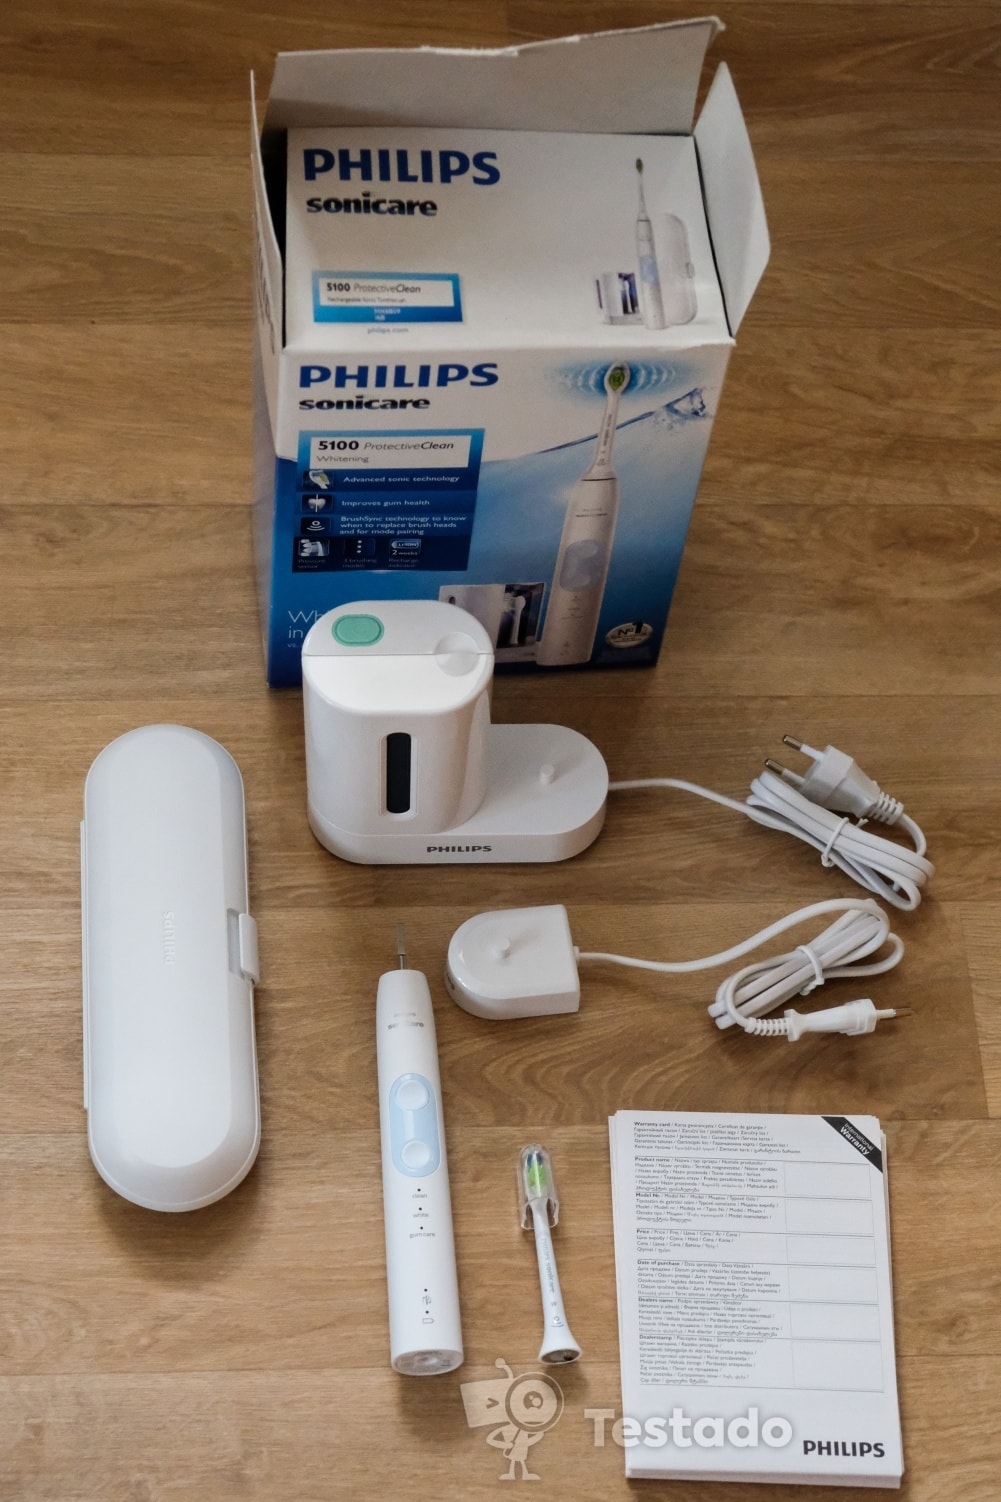 Philips Sonicare ProtectiveClean 5100 obsah balení